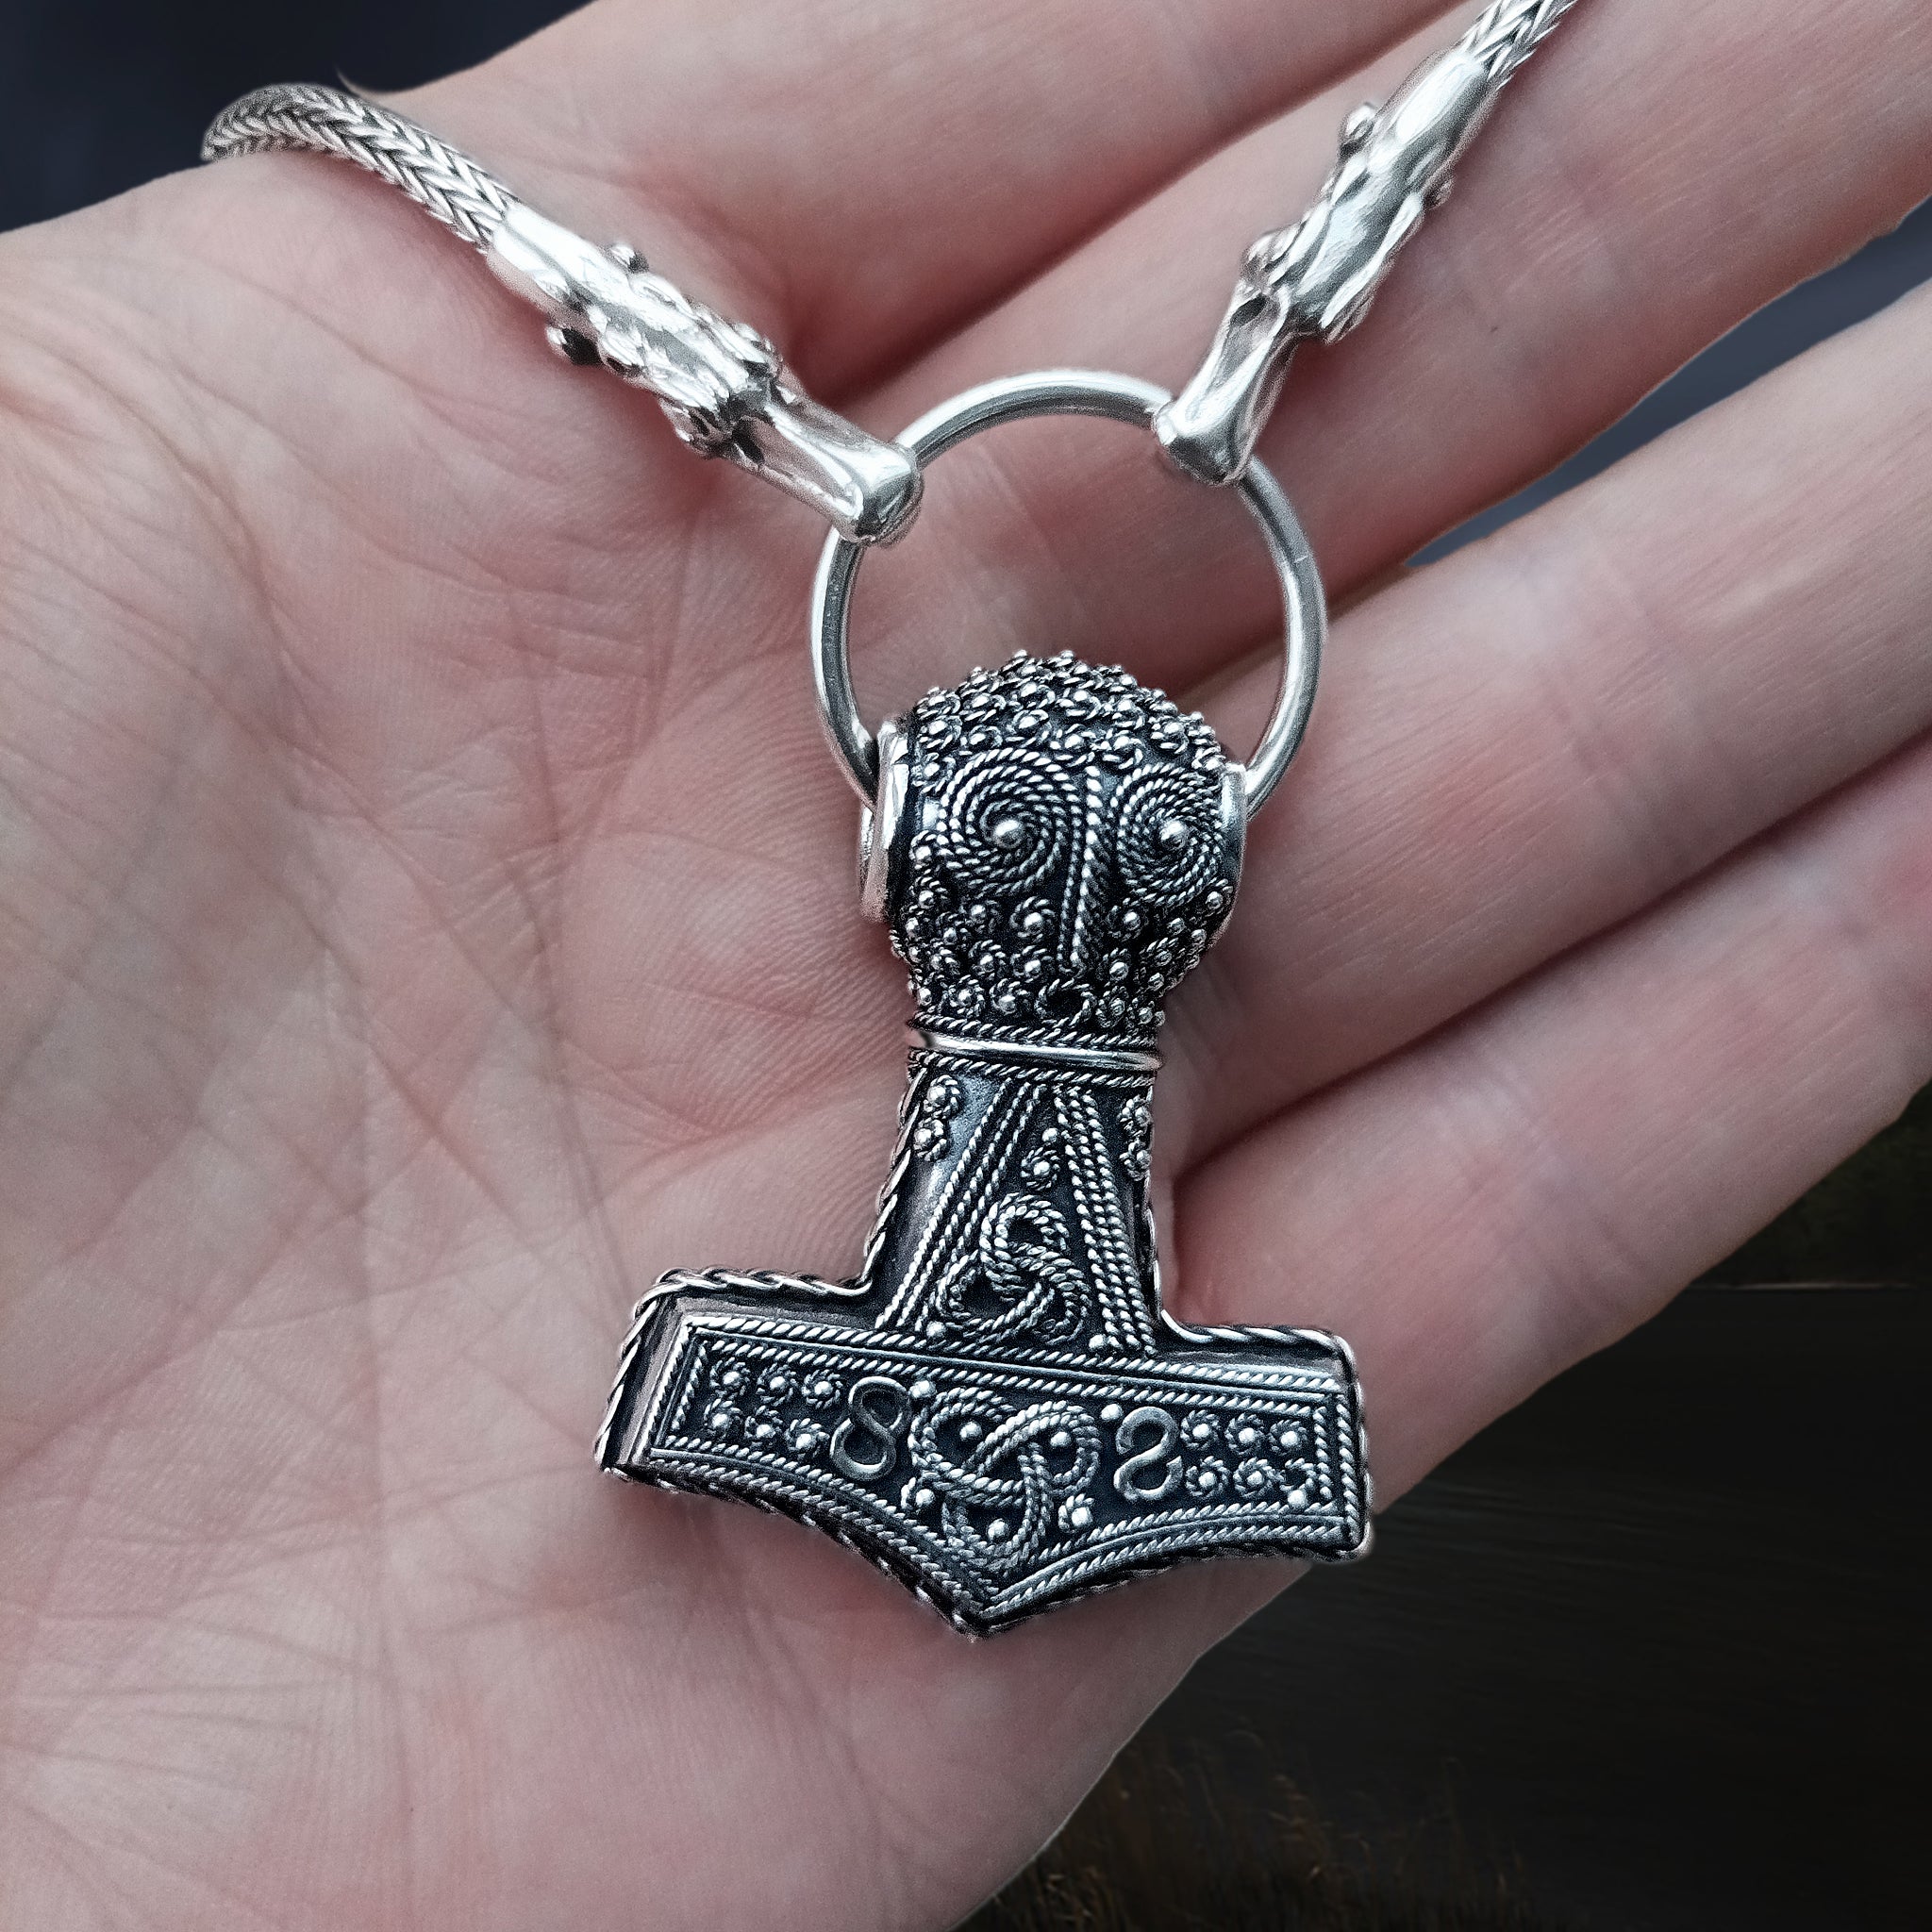 Silver Filigree Thors Hammer Pendant Replica from Öland with Split Ring and Silver Snake Chain with Tromso Dragon Heads on Hand